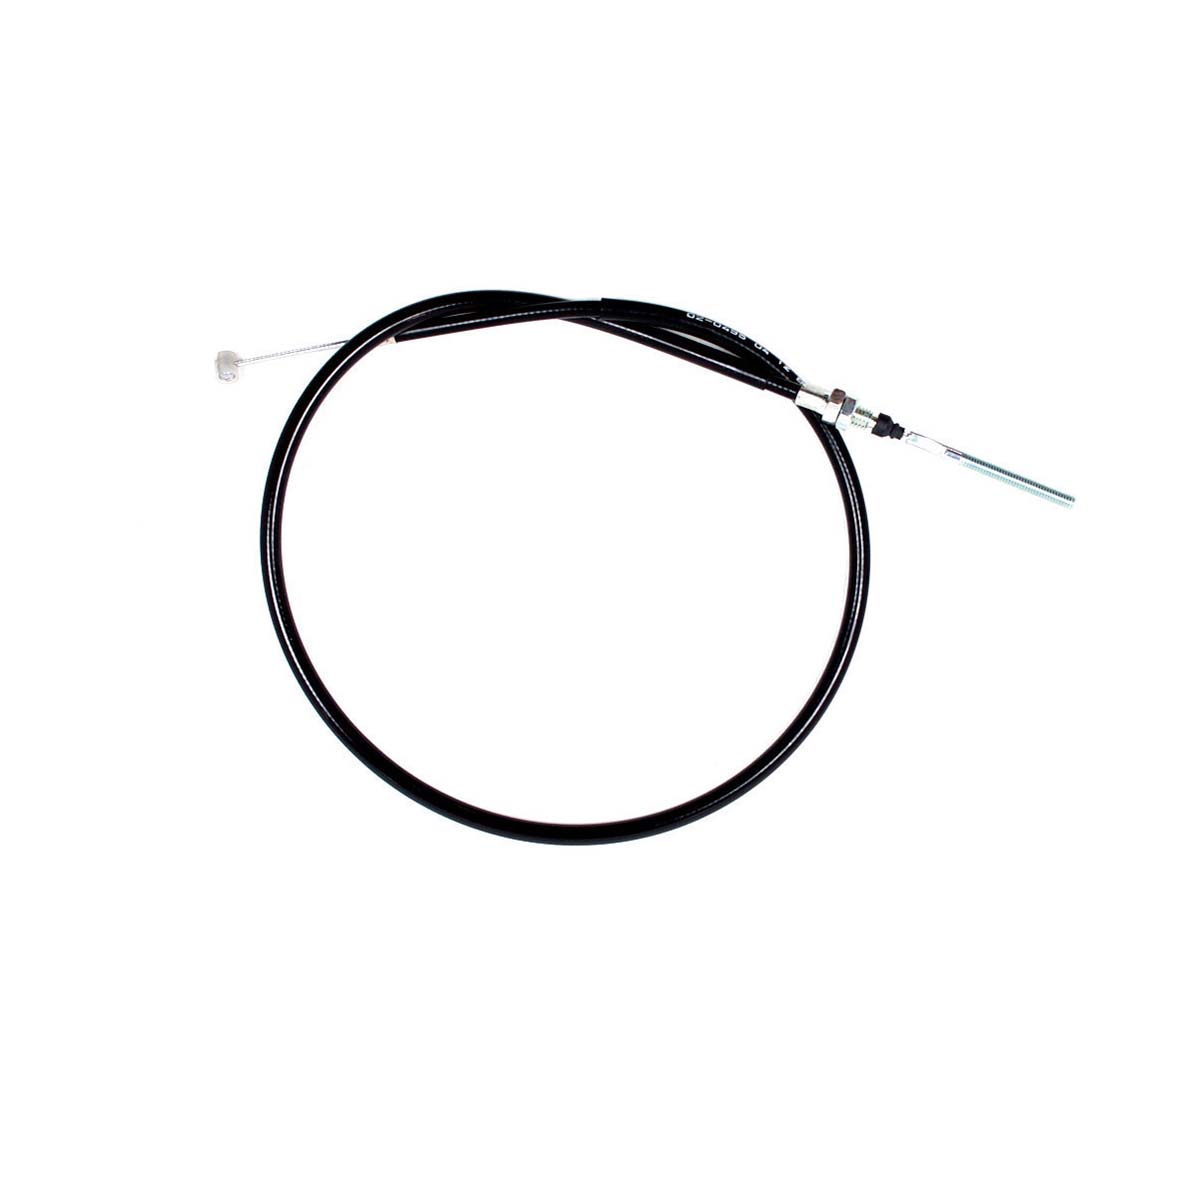 Motion Pro Extended Front Brake Cable